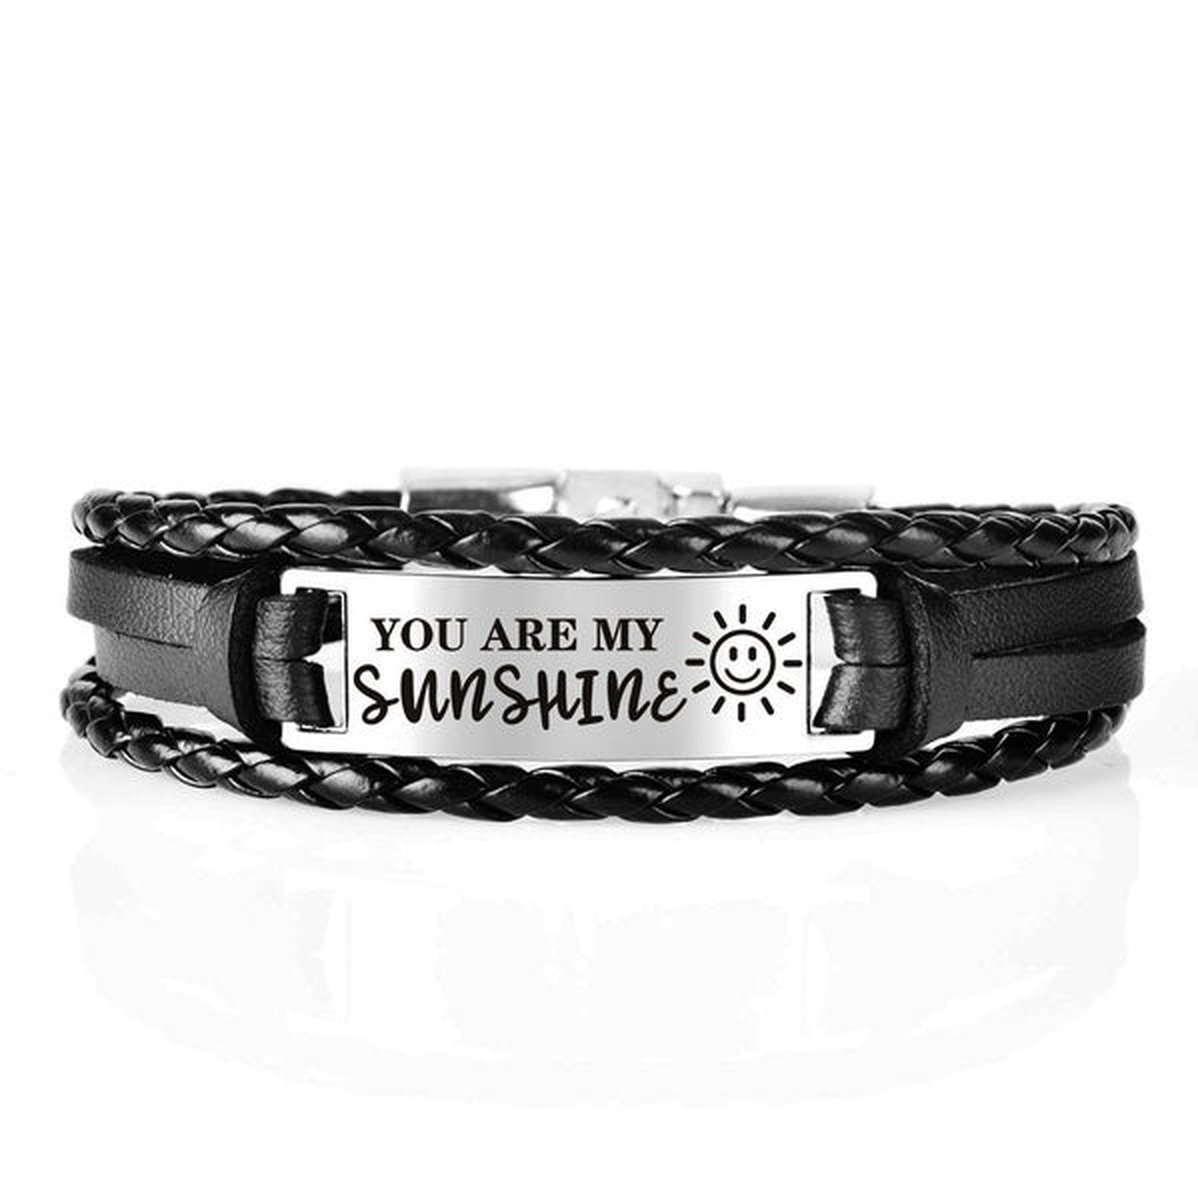 Manks Collections ® Zwarte Armband, You are my Sunshine armband - vriendinnen armband - cadeau voor een vriendin - Zilverig armband met de Zon - Armband 21 cm